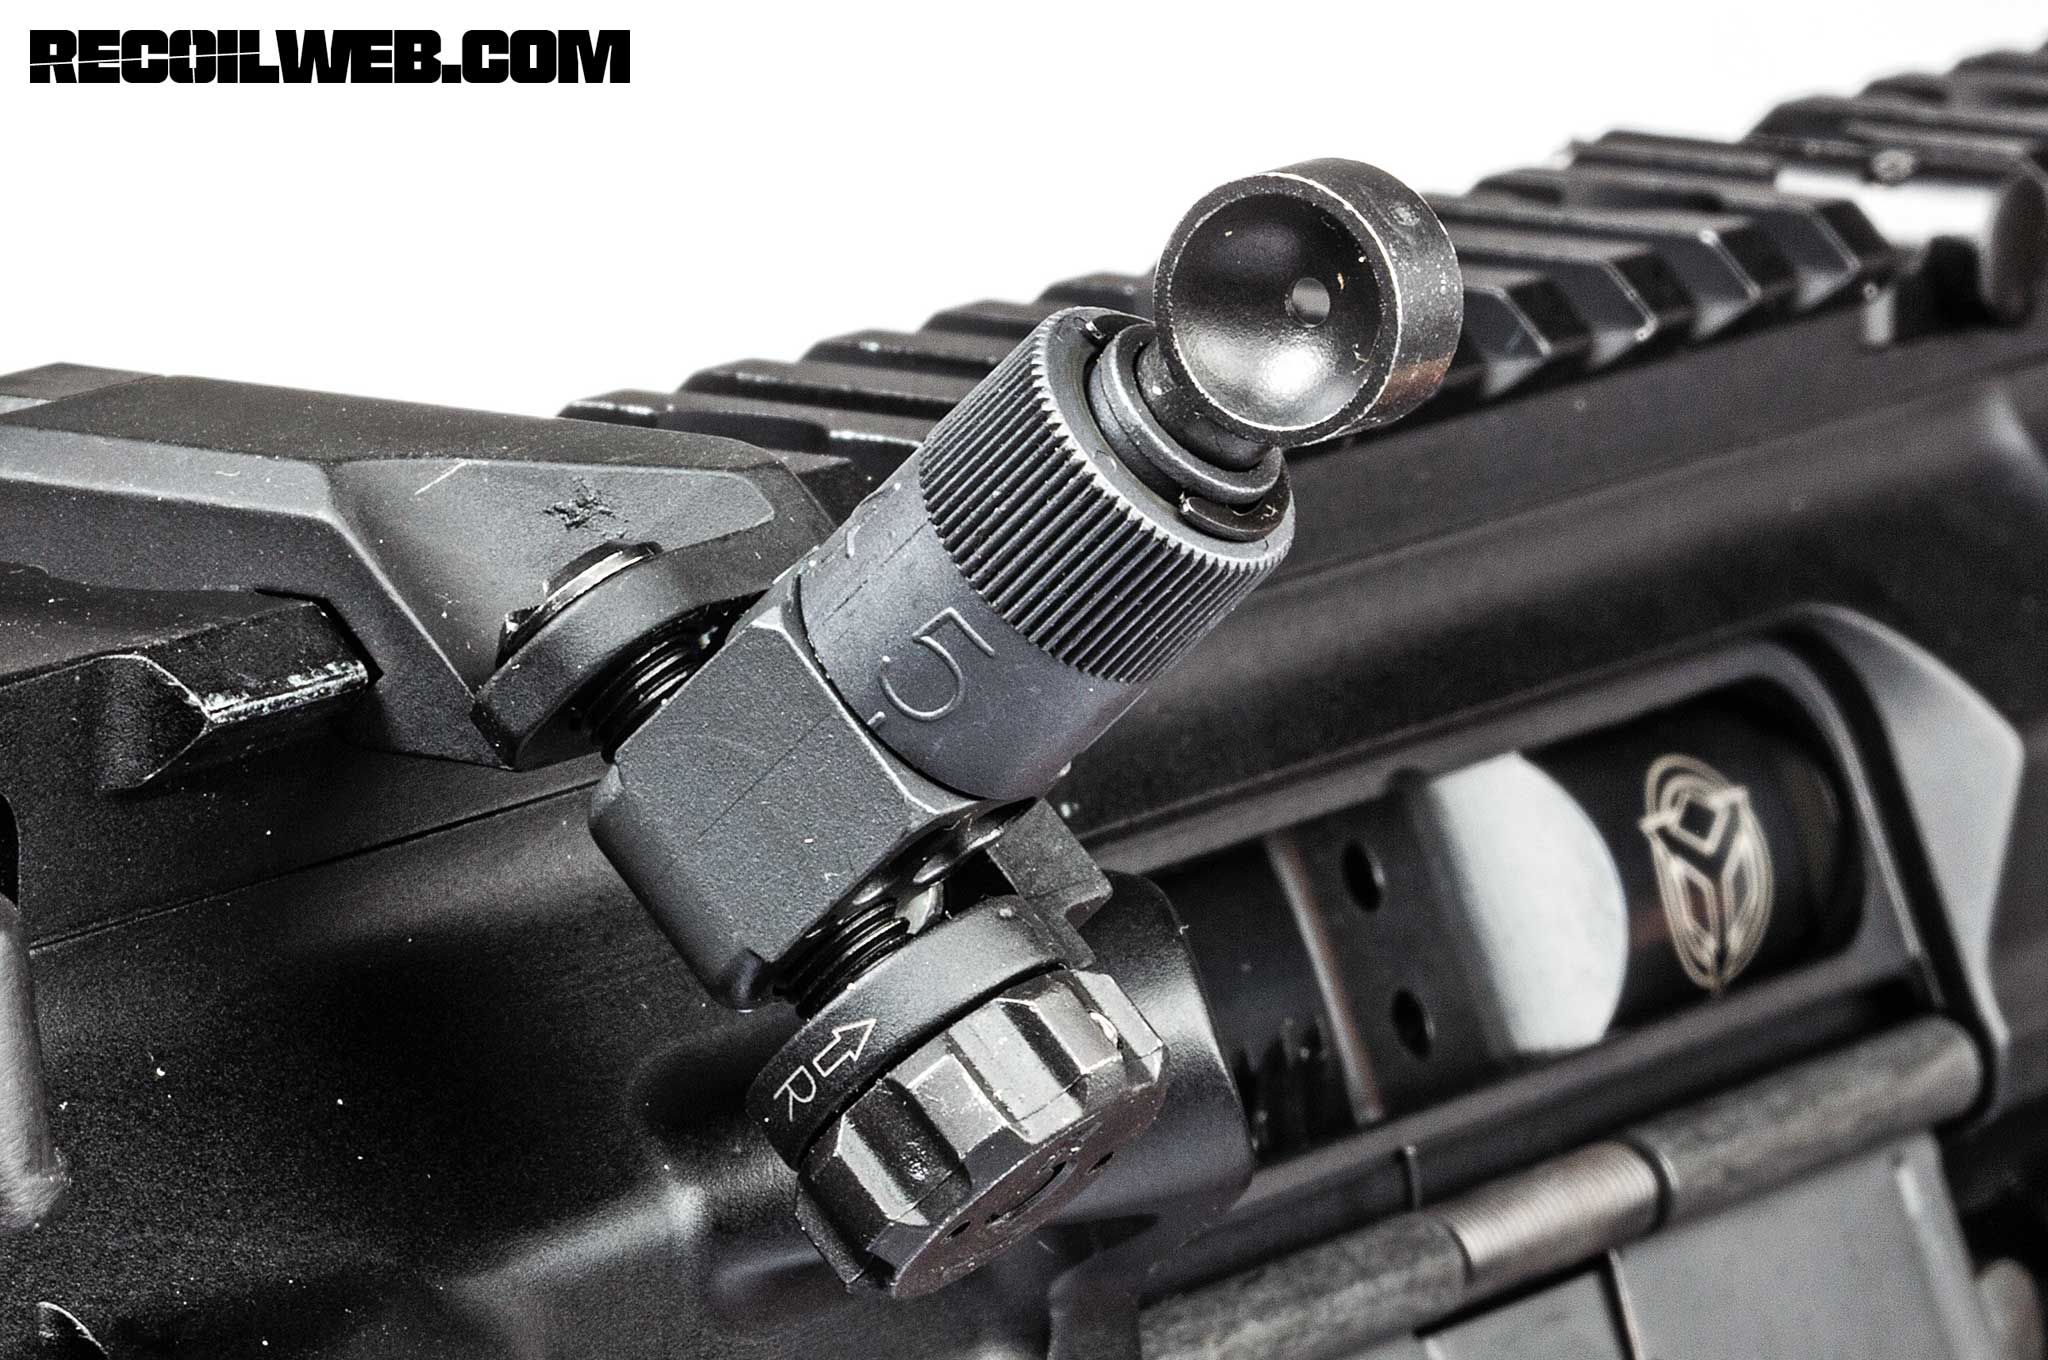 back-up-iron-sights-buyers-guide-knights-armament-45-degree-offset-folding-...